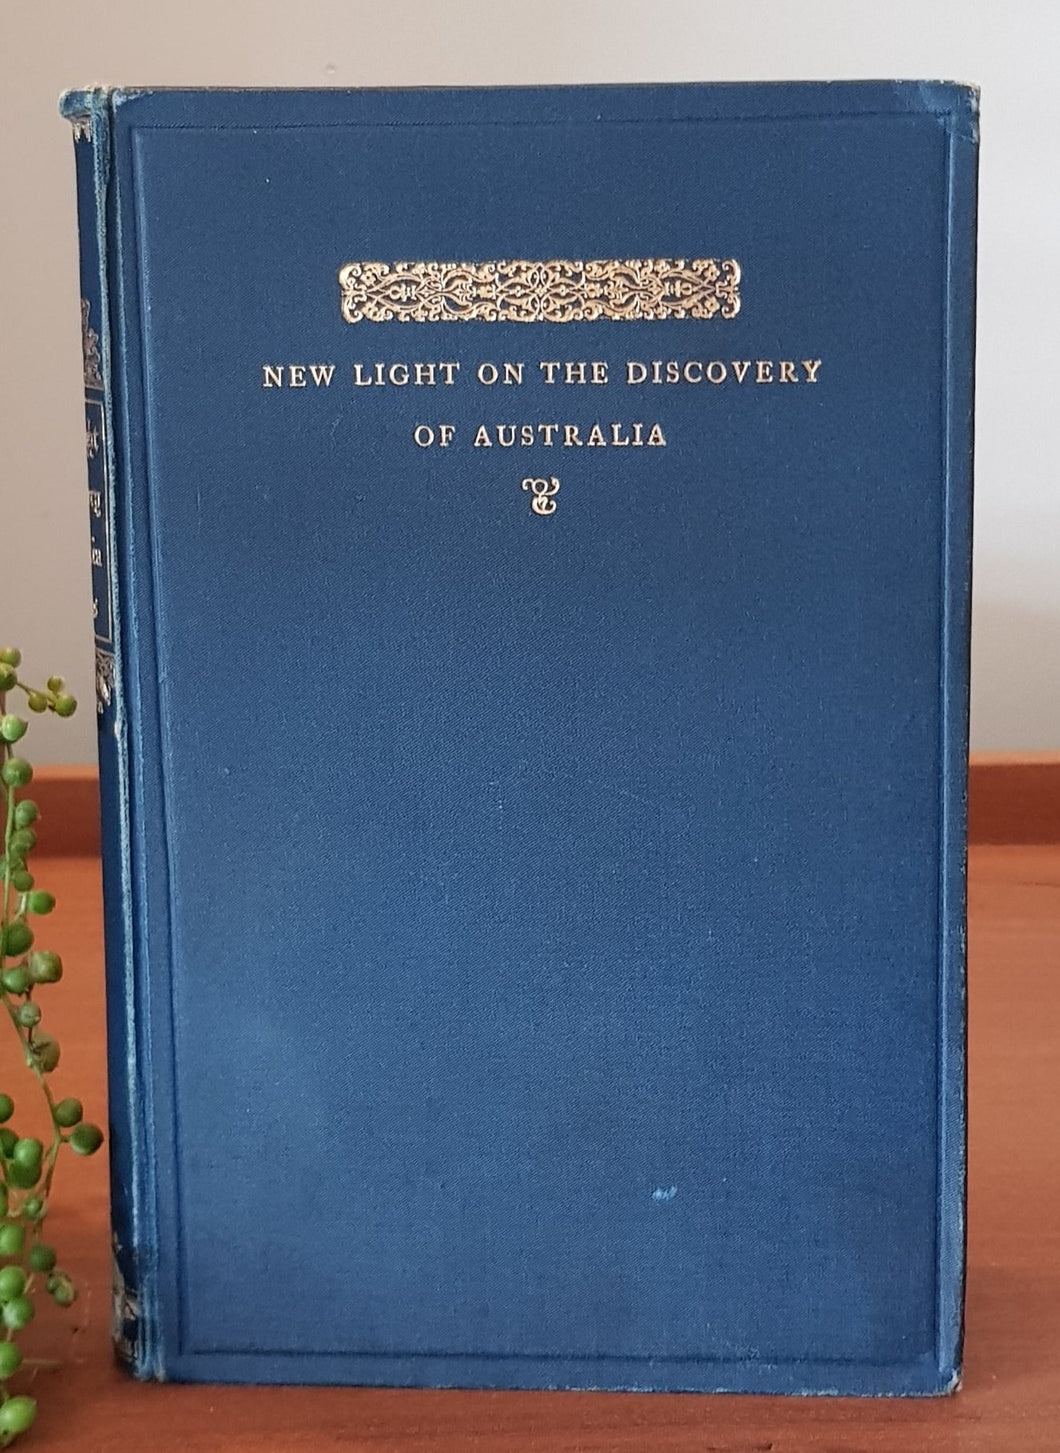 New Light on the Discovery of Australia by George F Barwick (First Edition)